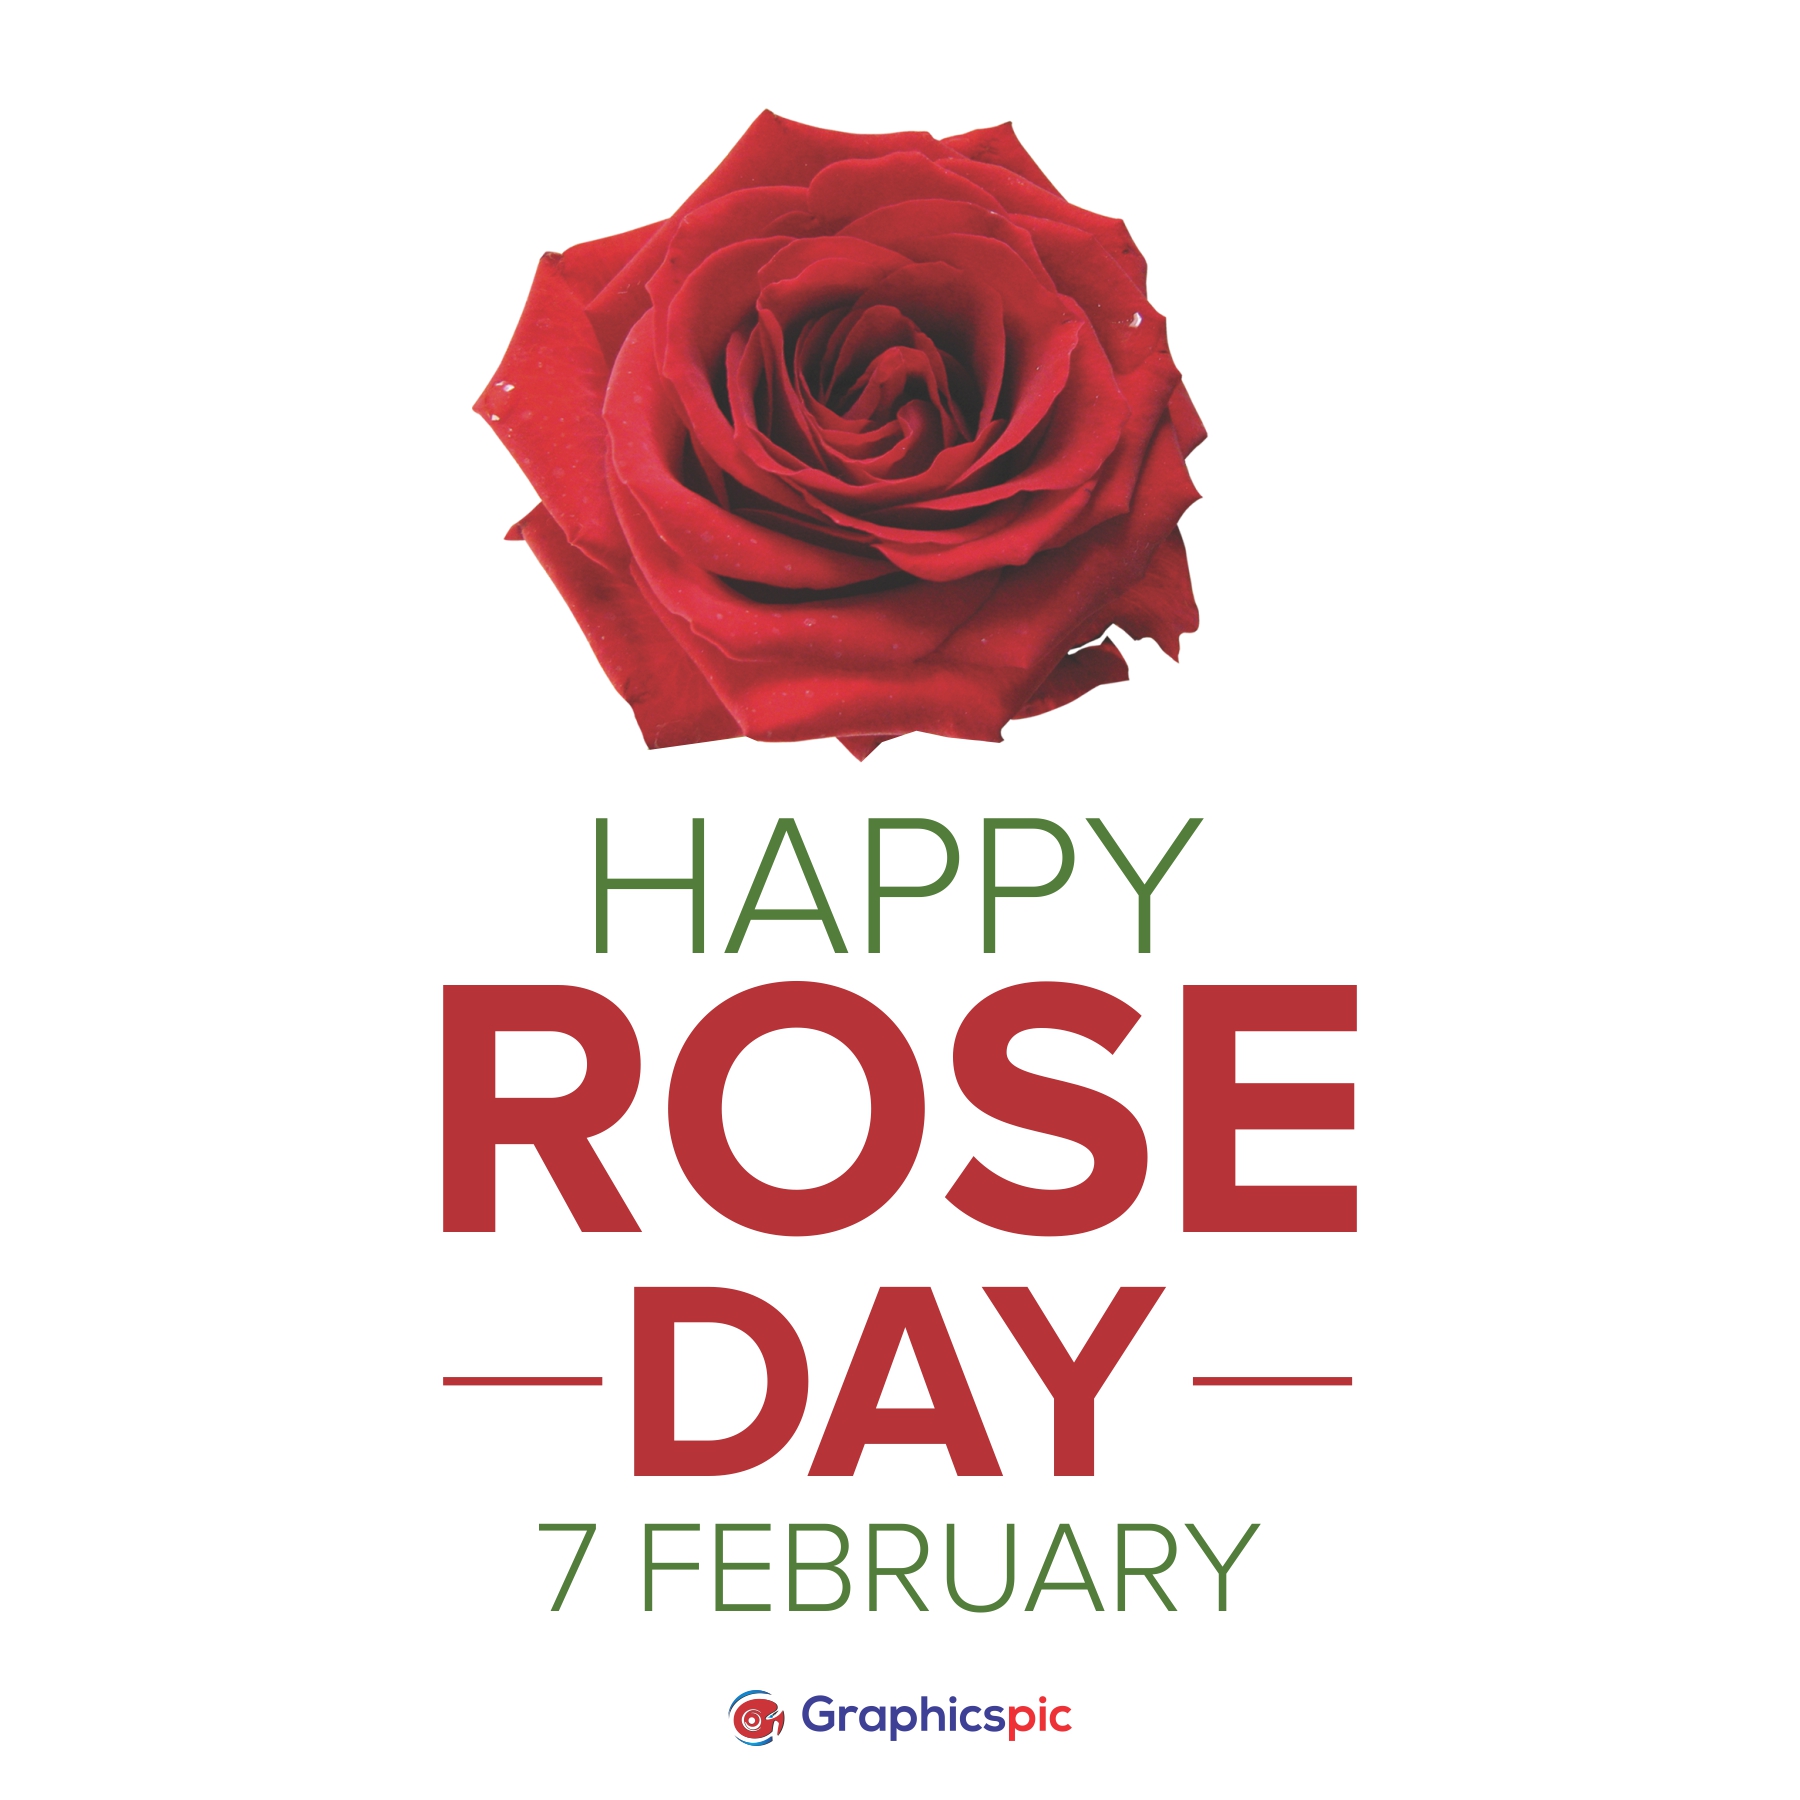 Happy Rose Day On February 7 with red rose symbol poster illustration